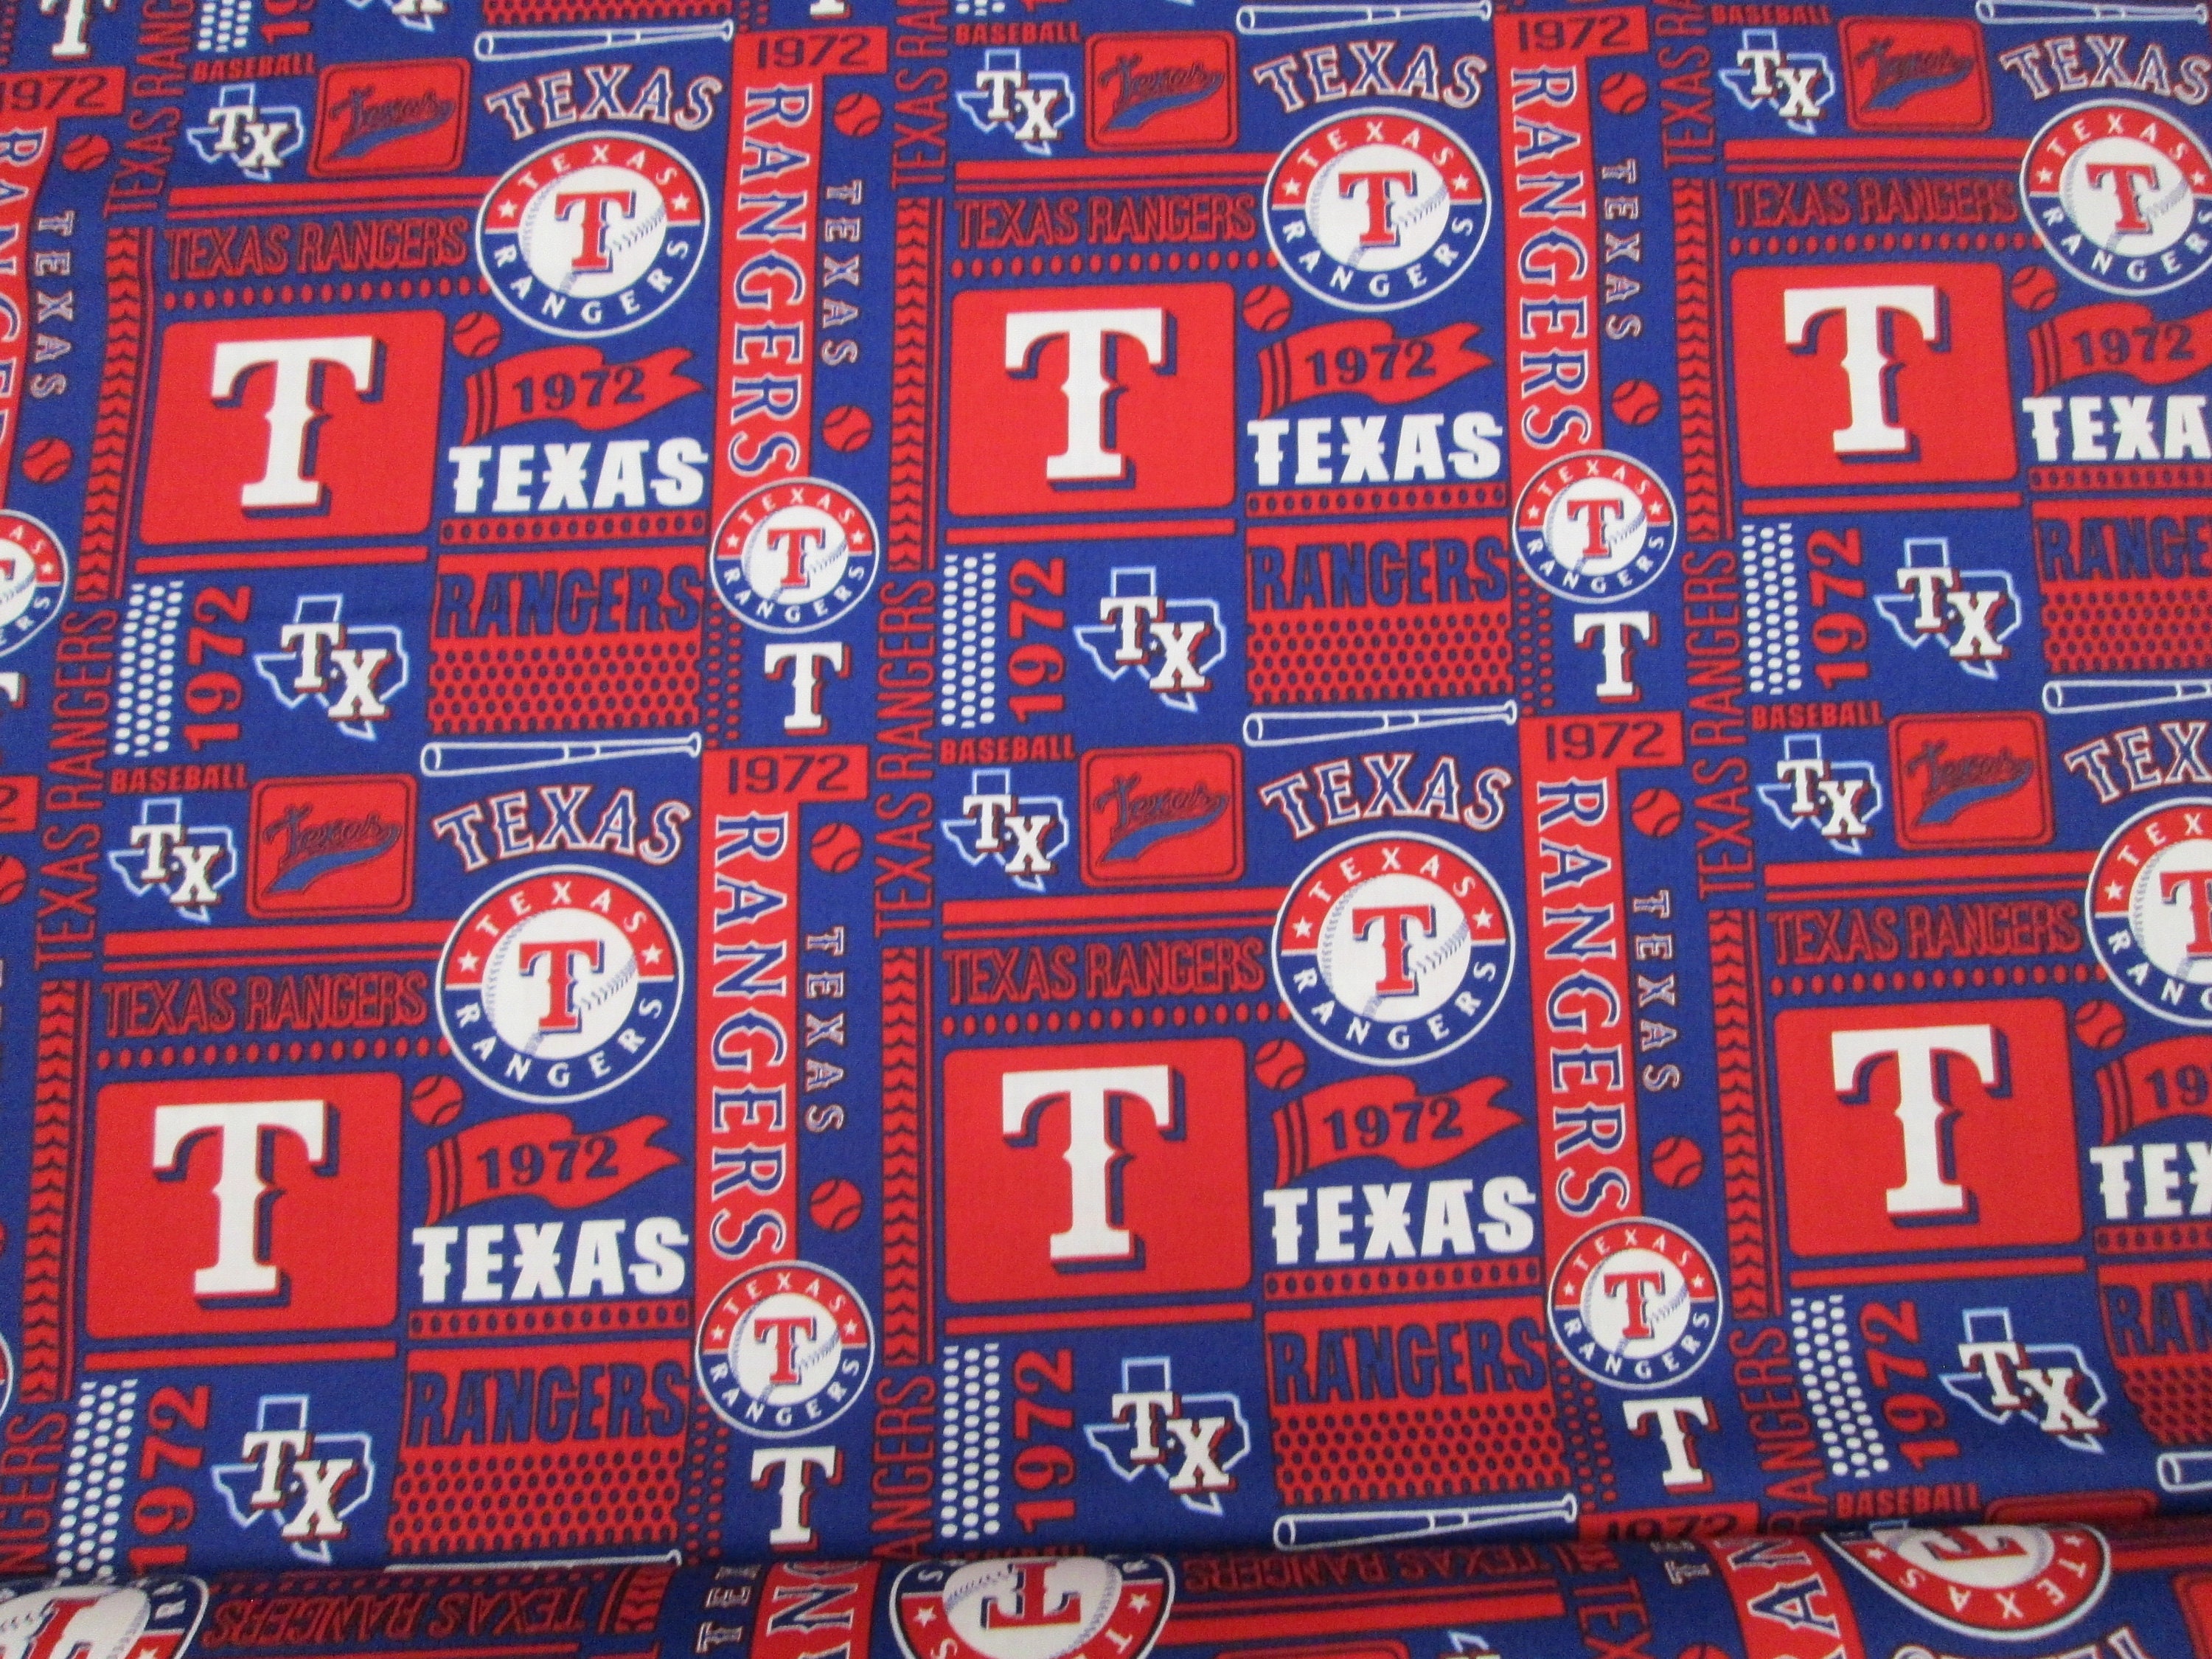 Maker of Jacket Sports Leagues Jackets MLB Texas Rangers Royal Blue and Red Satin